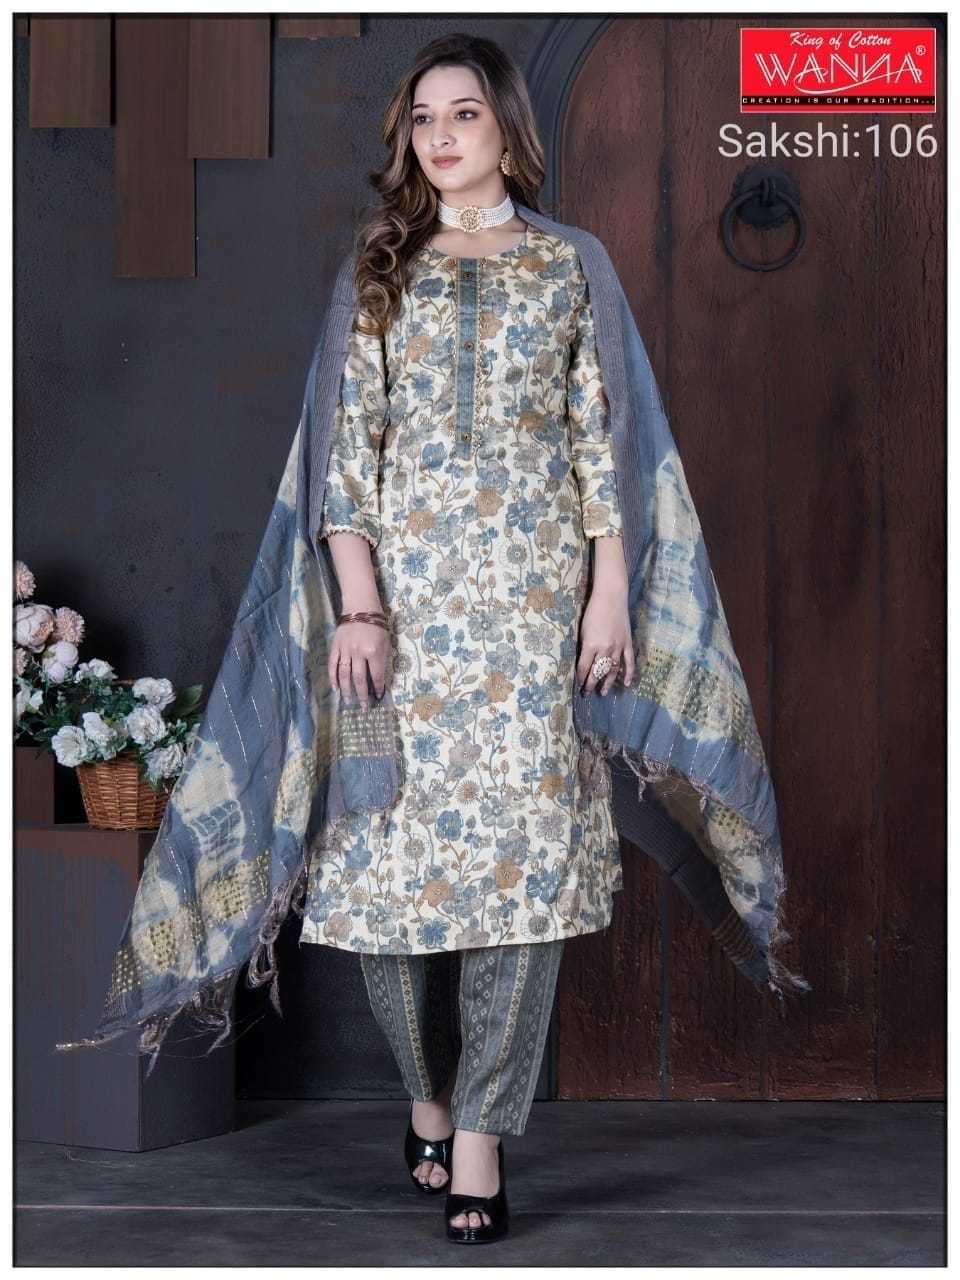 wanna sakshi series 101-106 Heavy capsule readymade suit